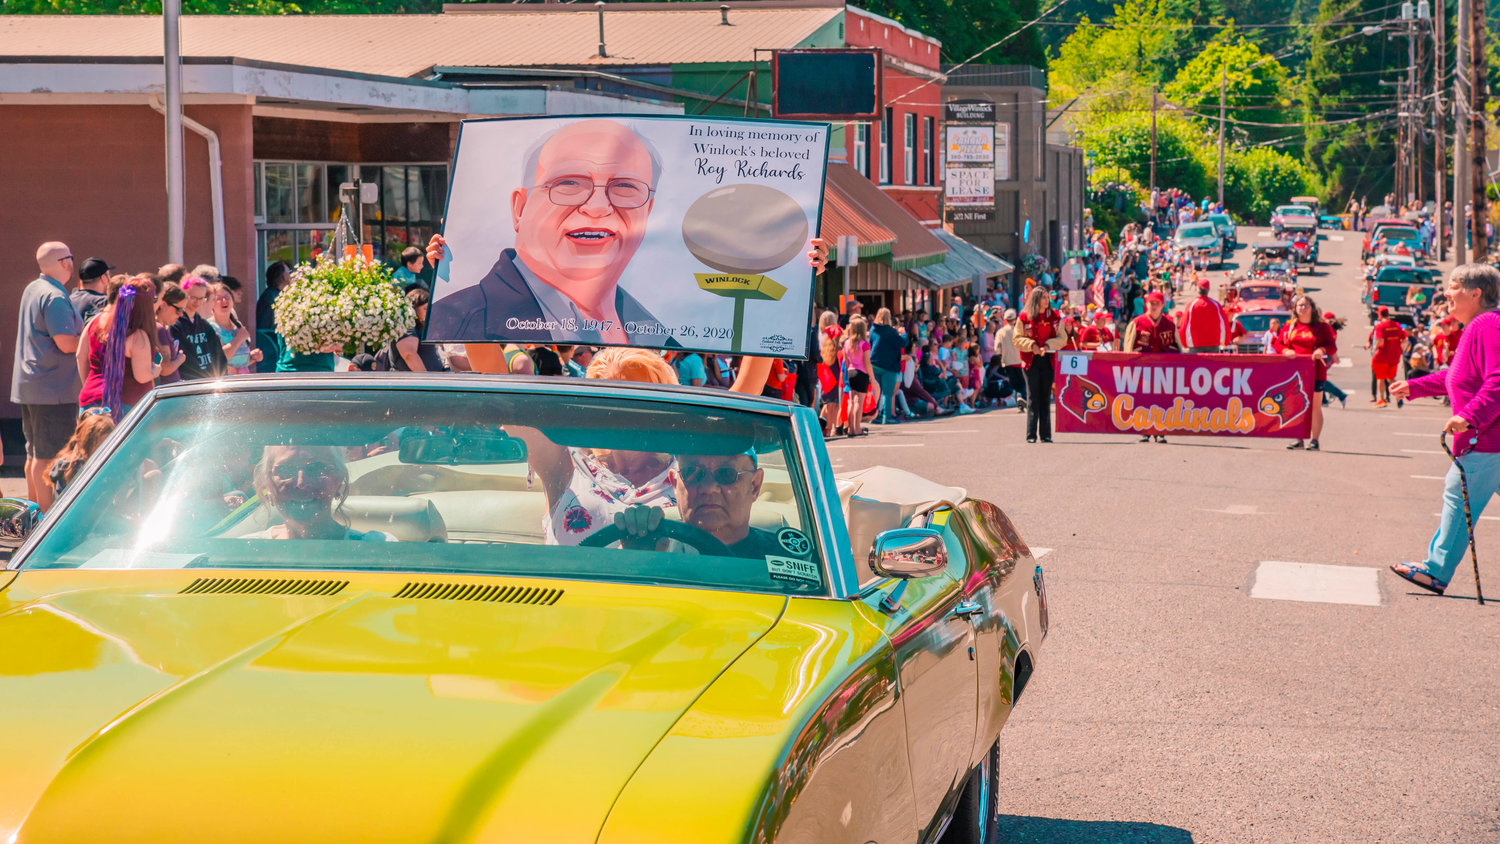 Late Winlock historian Roy Richards is honored as the grand marshal during the Egg Days parade in Winlock on Saturday.